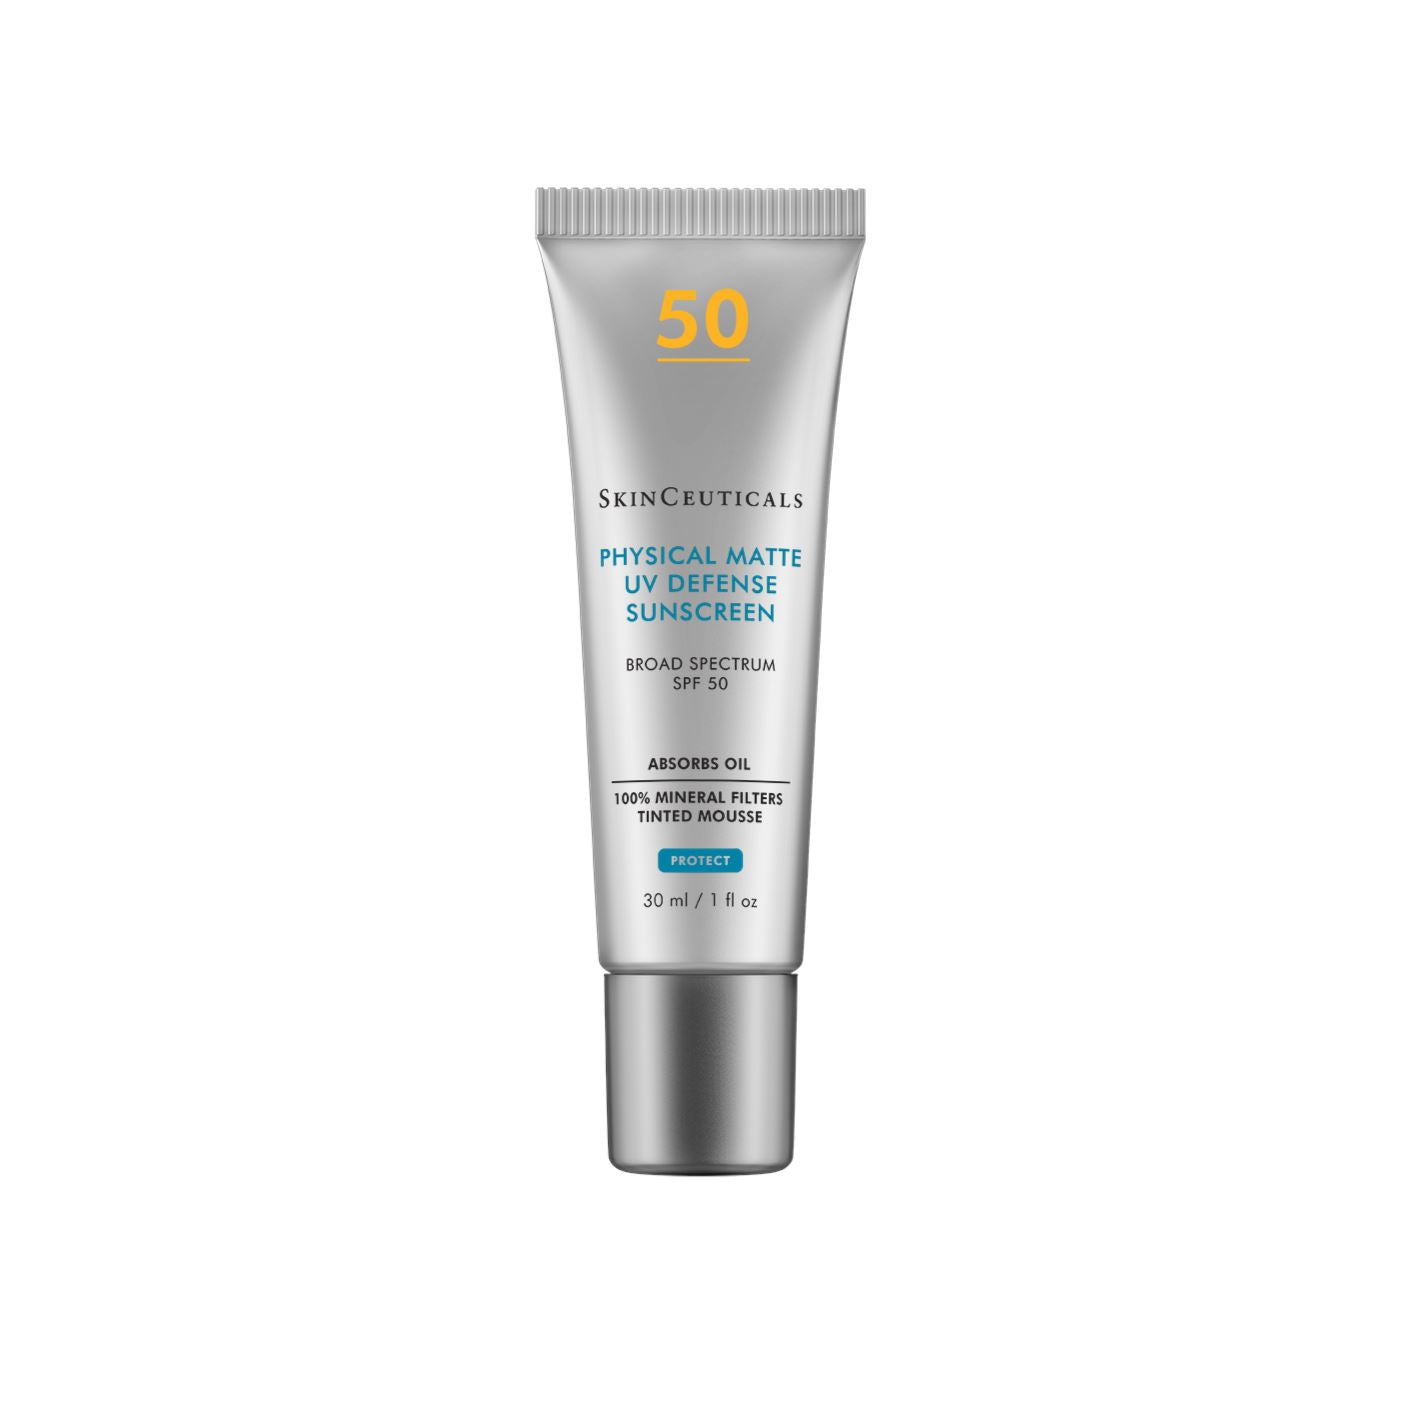 SkinCeuticals Physical Matte UV Defense SPF 50 SkinCeuticals 1.0 fl. oz. Shop at Exclusive Beauty Club